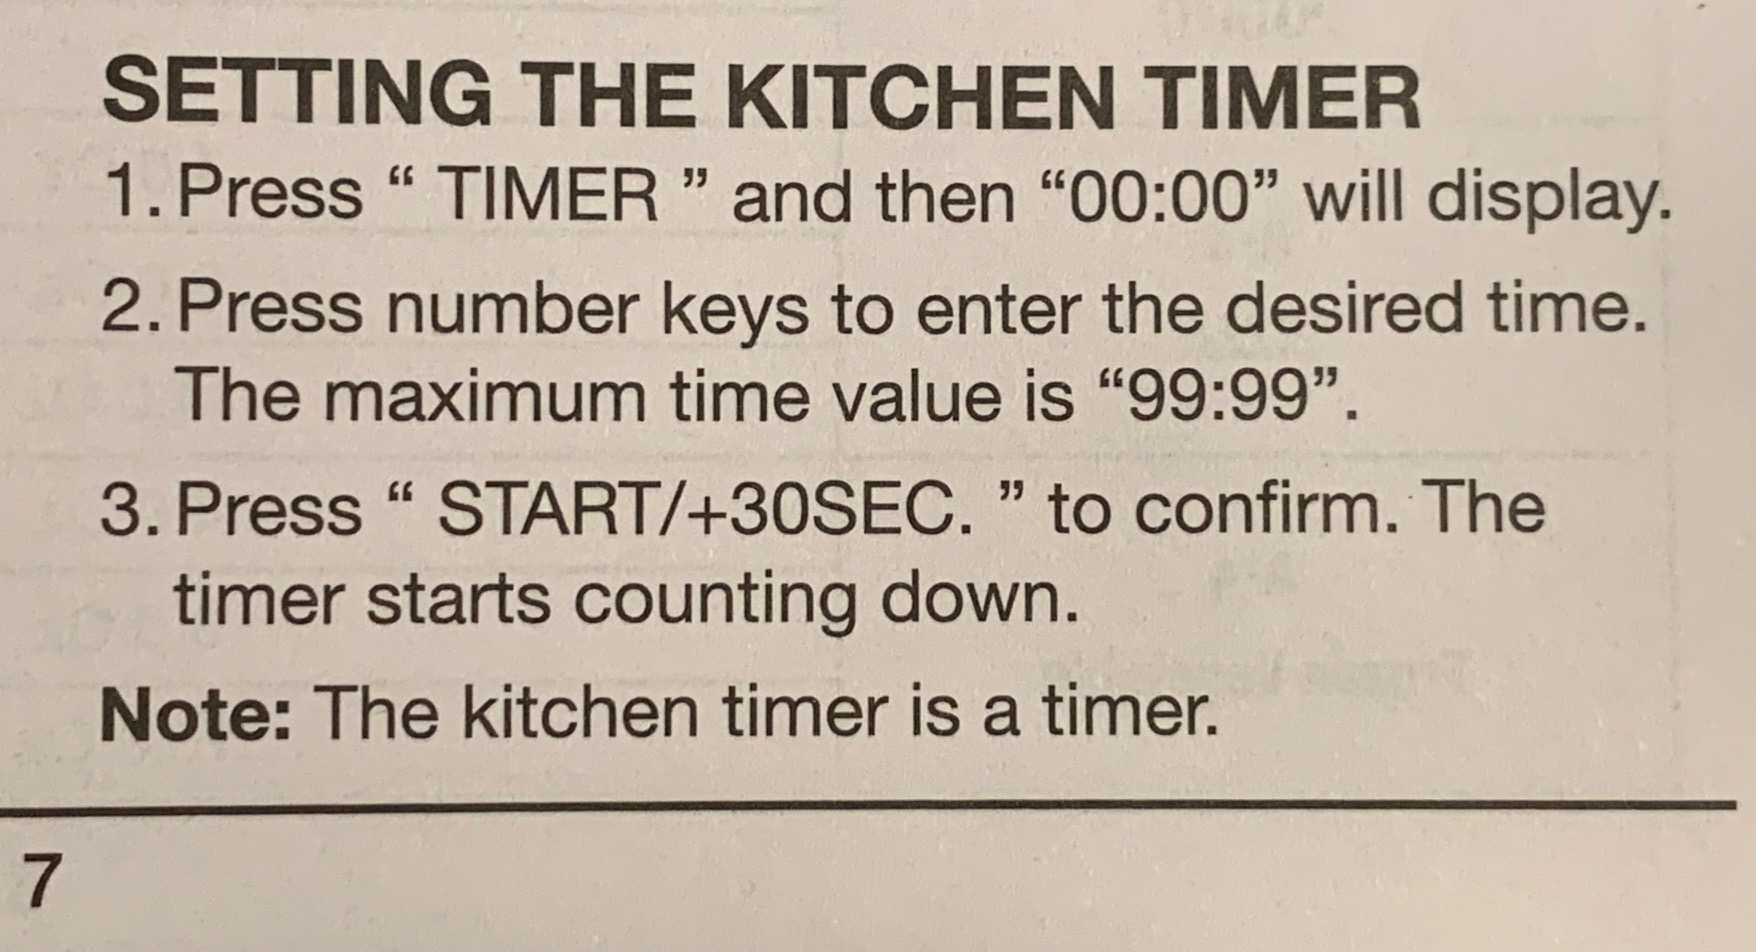 Note: The kitchen timer is a timer.